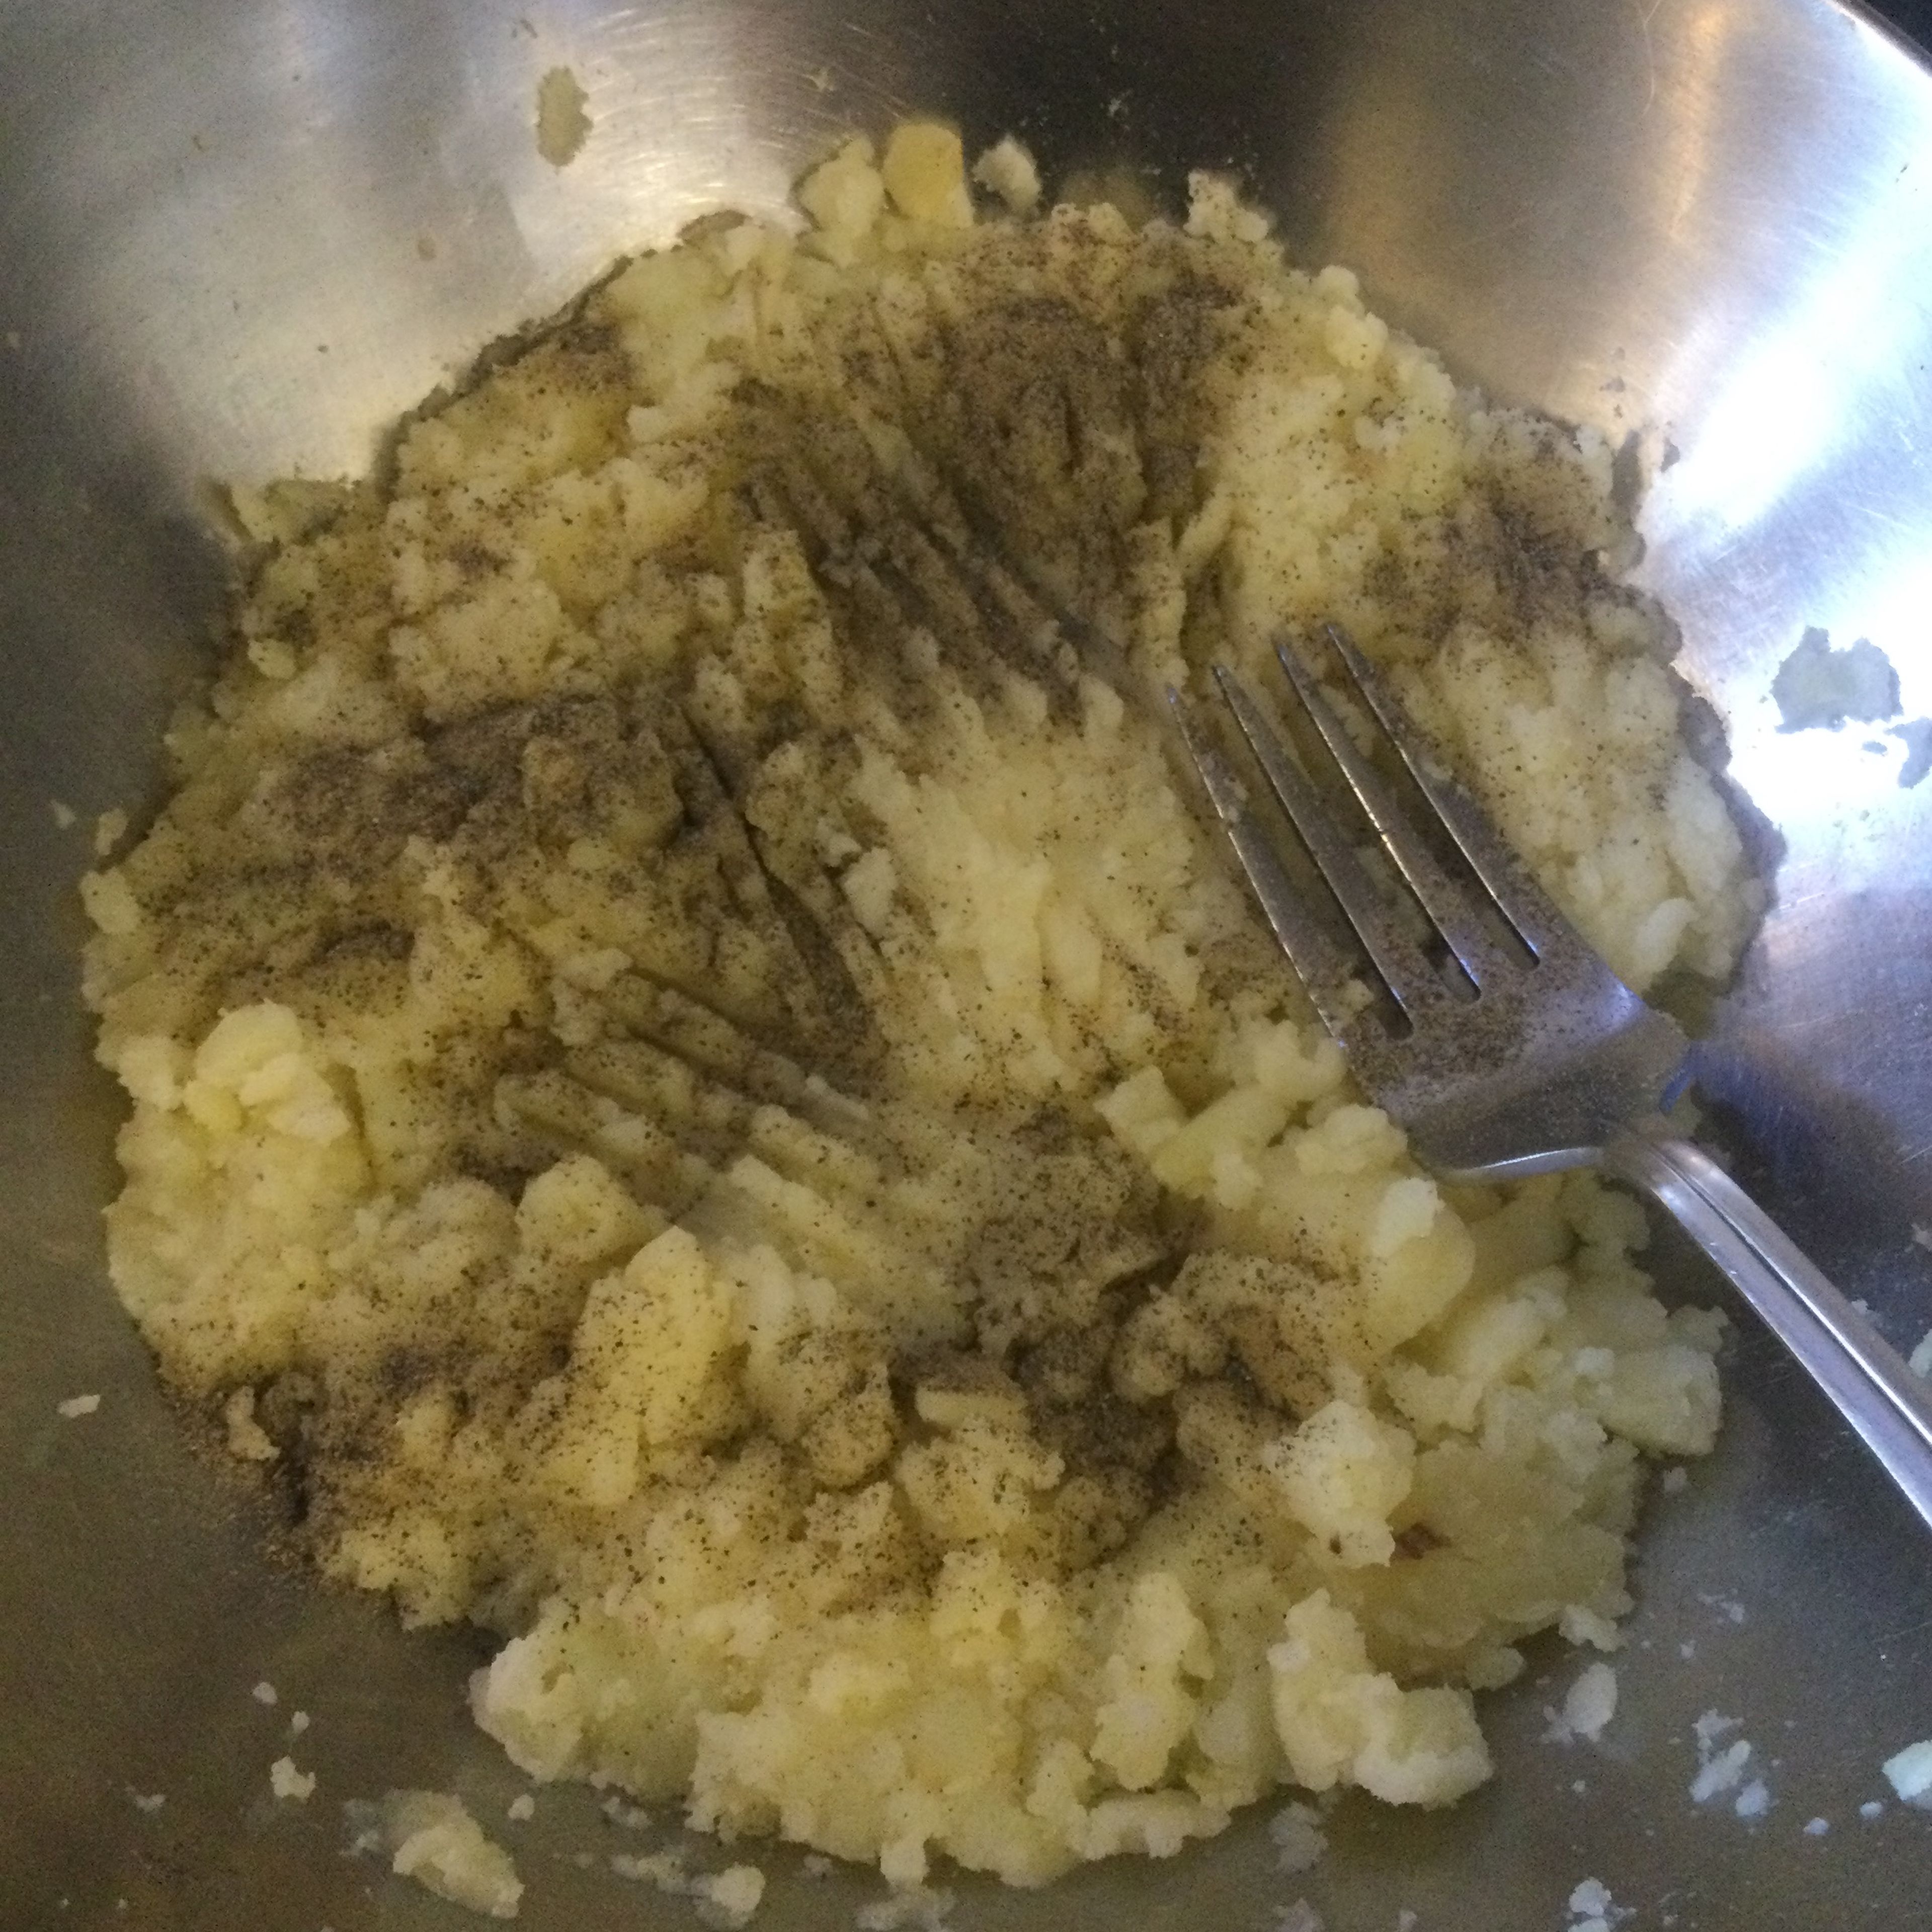 Mash the potatoes with black pepper and 4 tbsp of milk and put in the fridge until cold